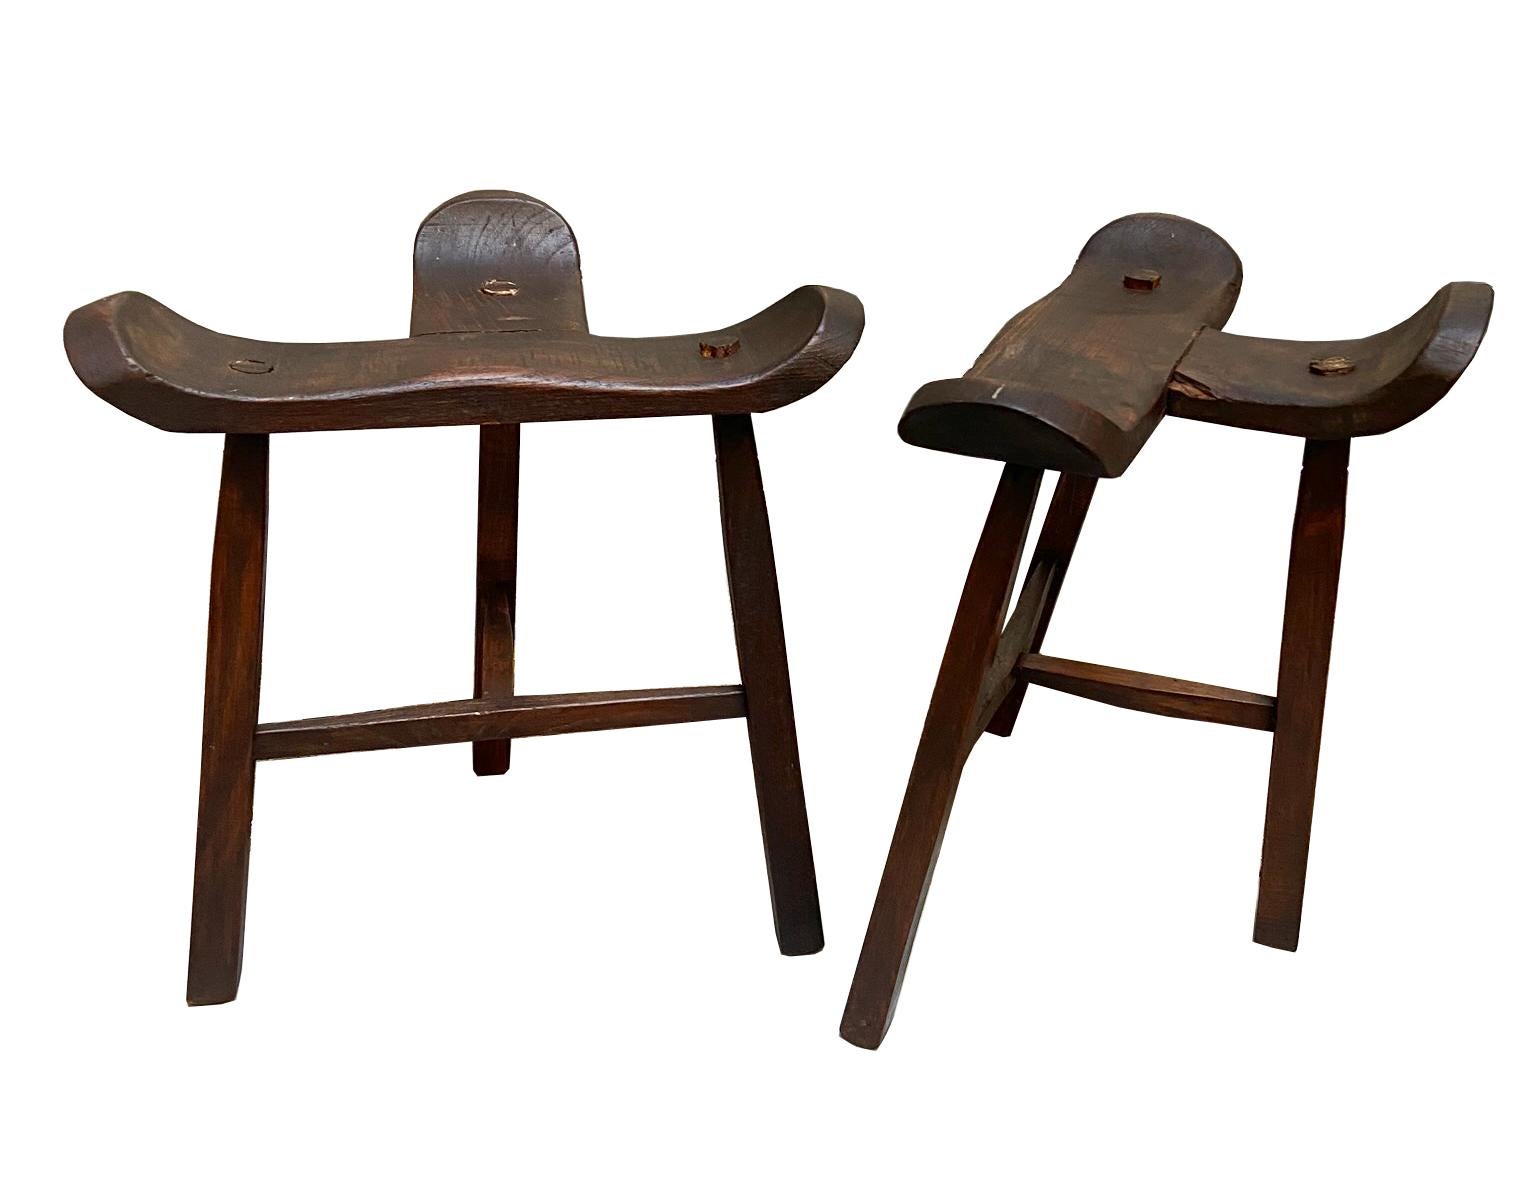 Mid-20th Century Pair of Antique Spanish Carved Wood Stools, 1950s